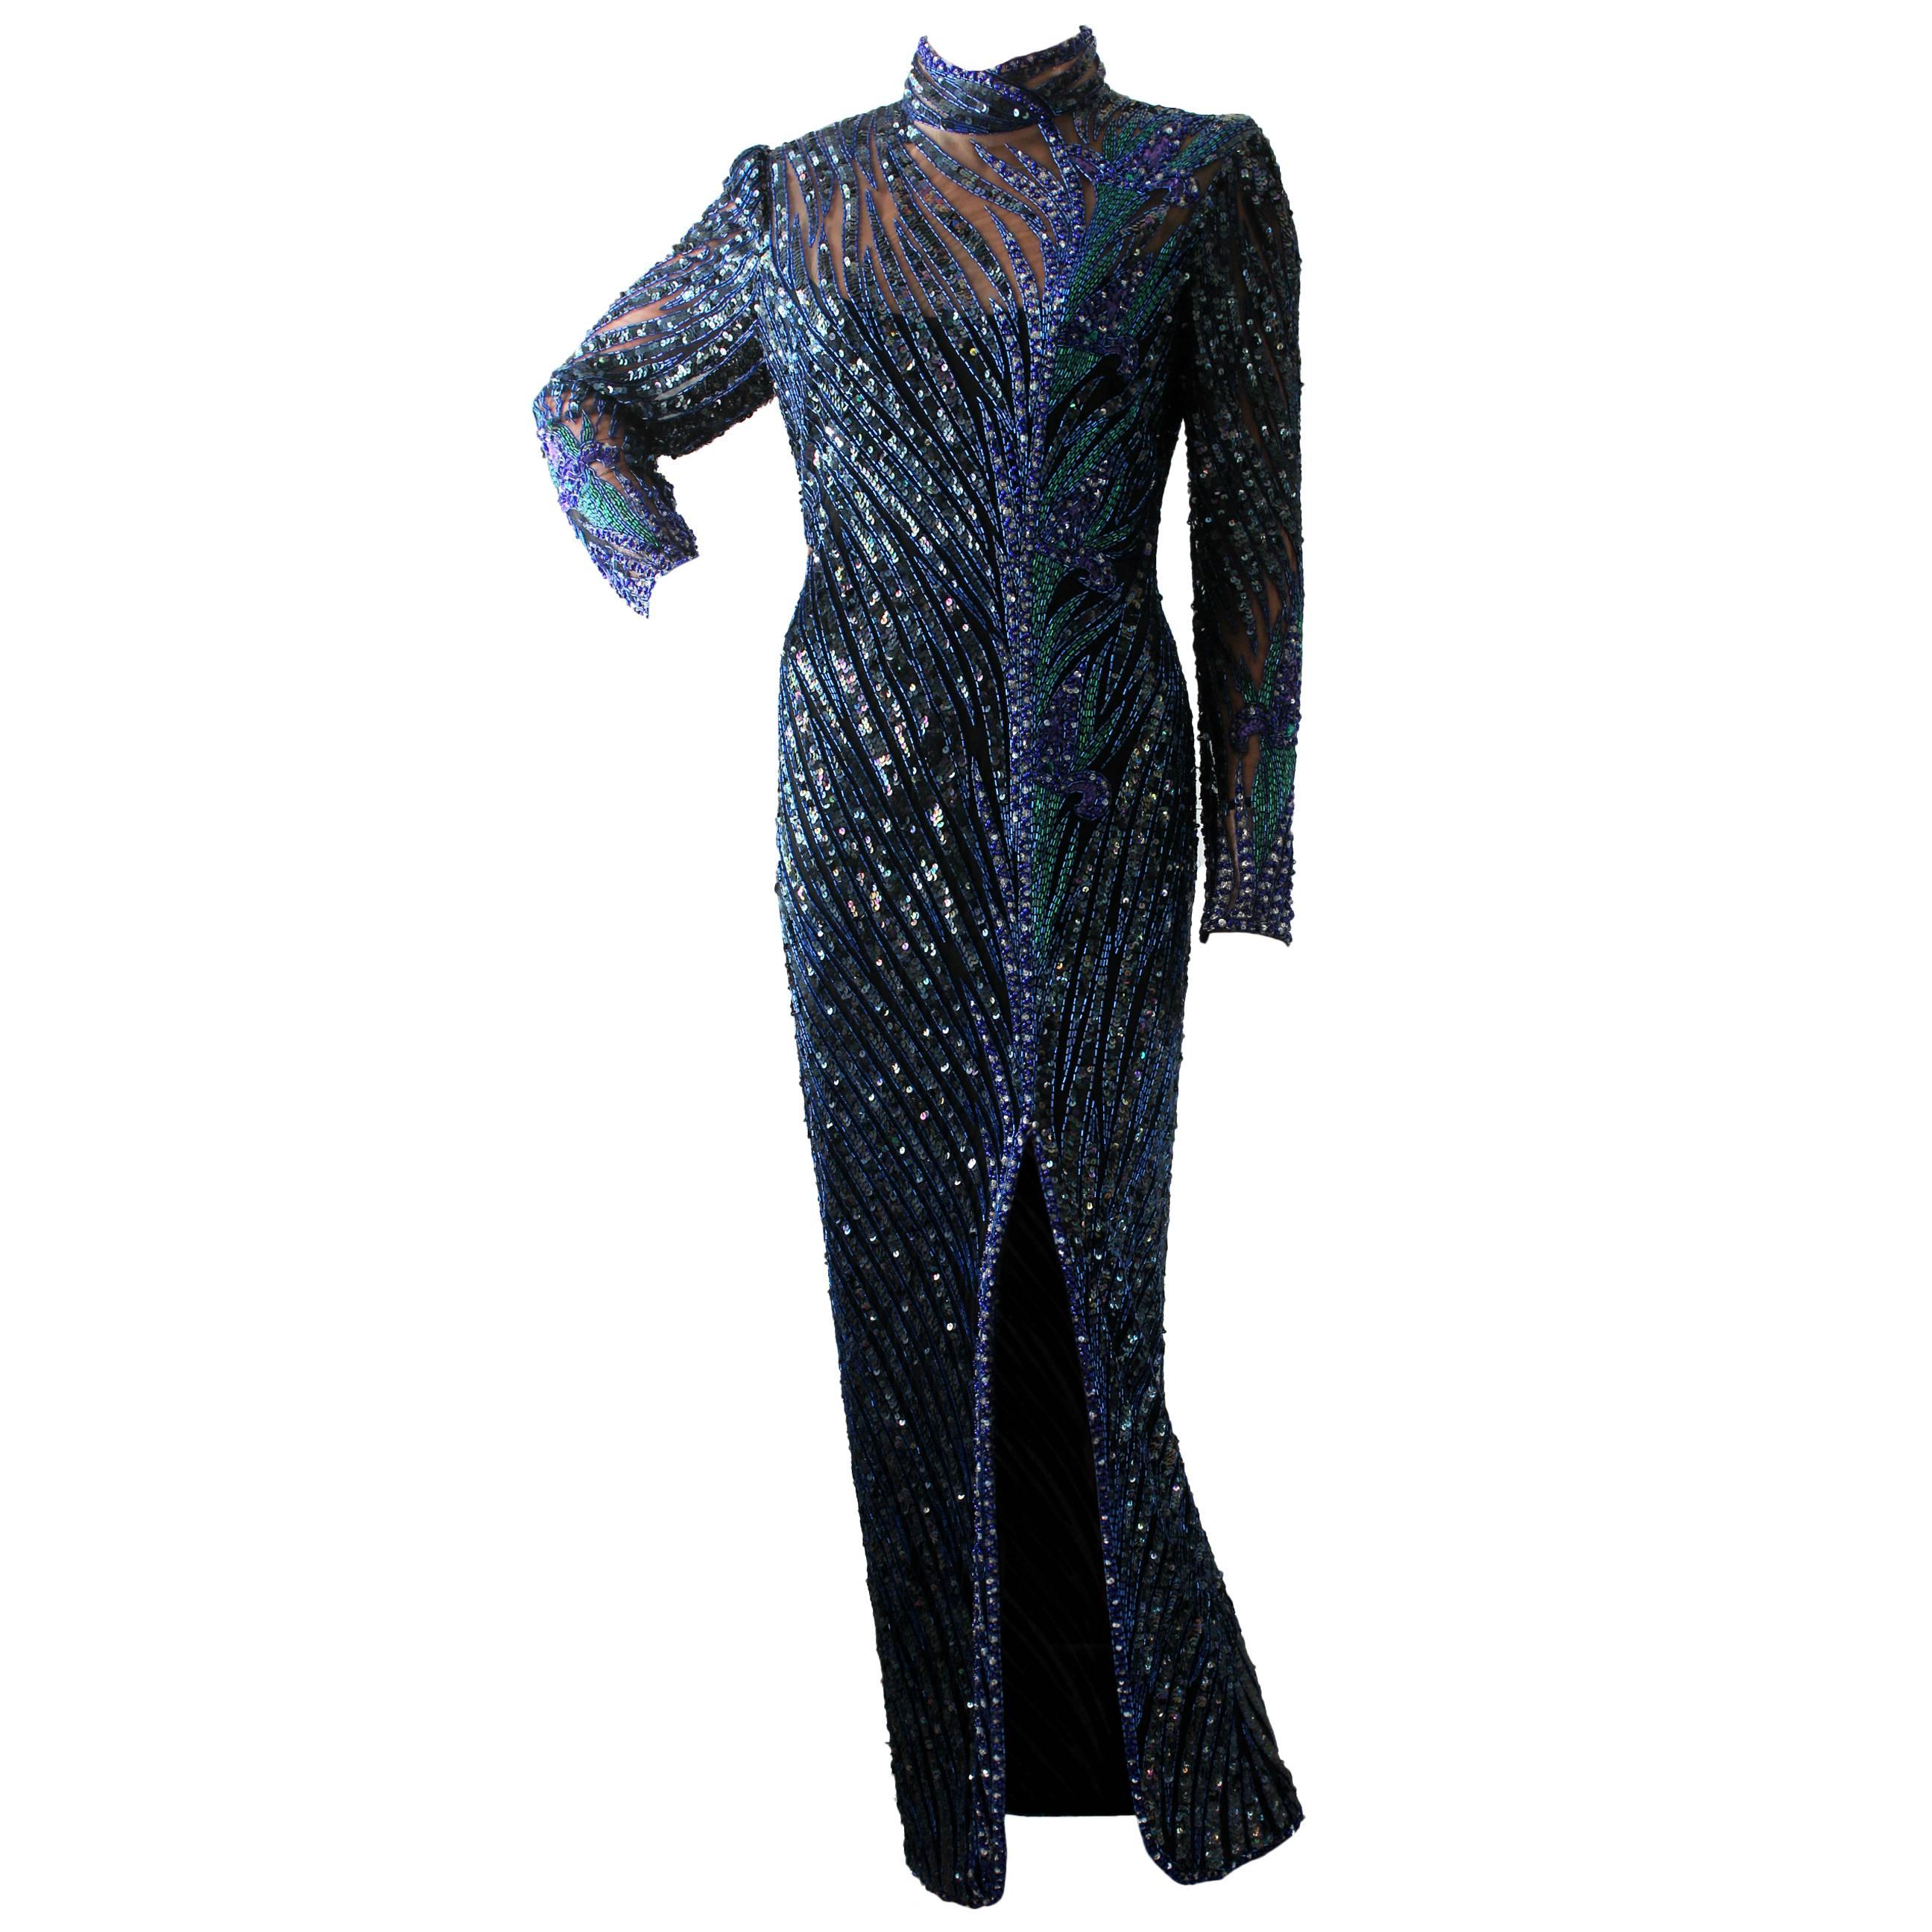 Exquisite Bob Mackie Boutique Fully Beaded Evening Gown Early 80s Size 14 